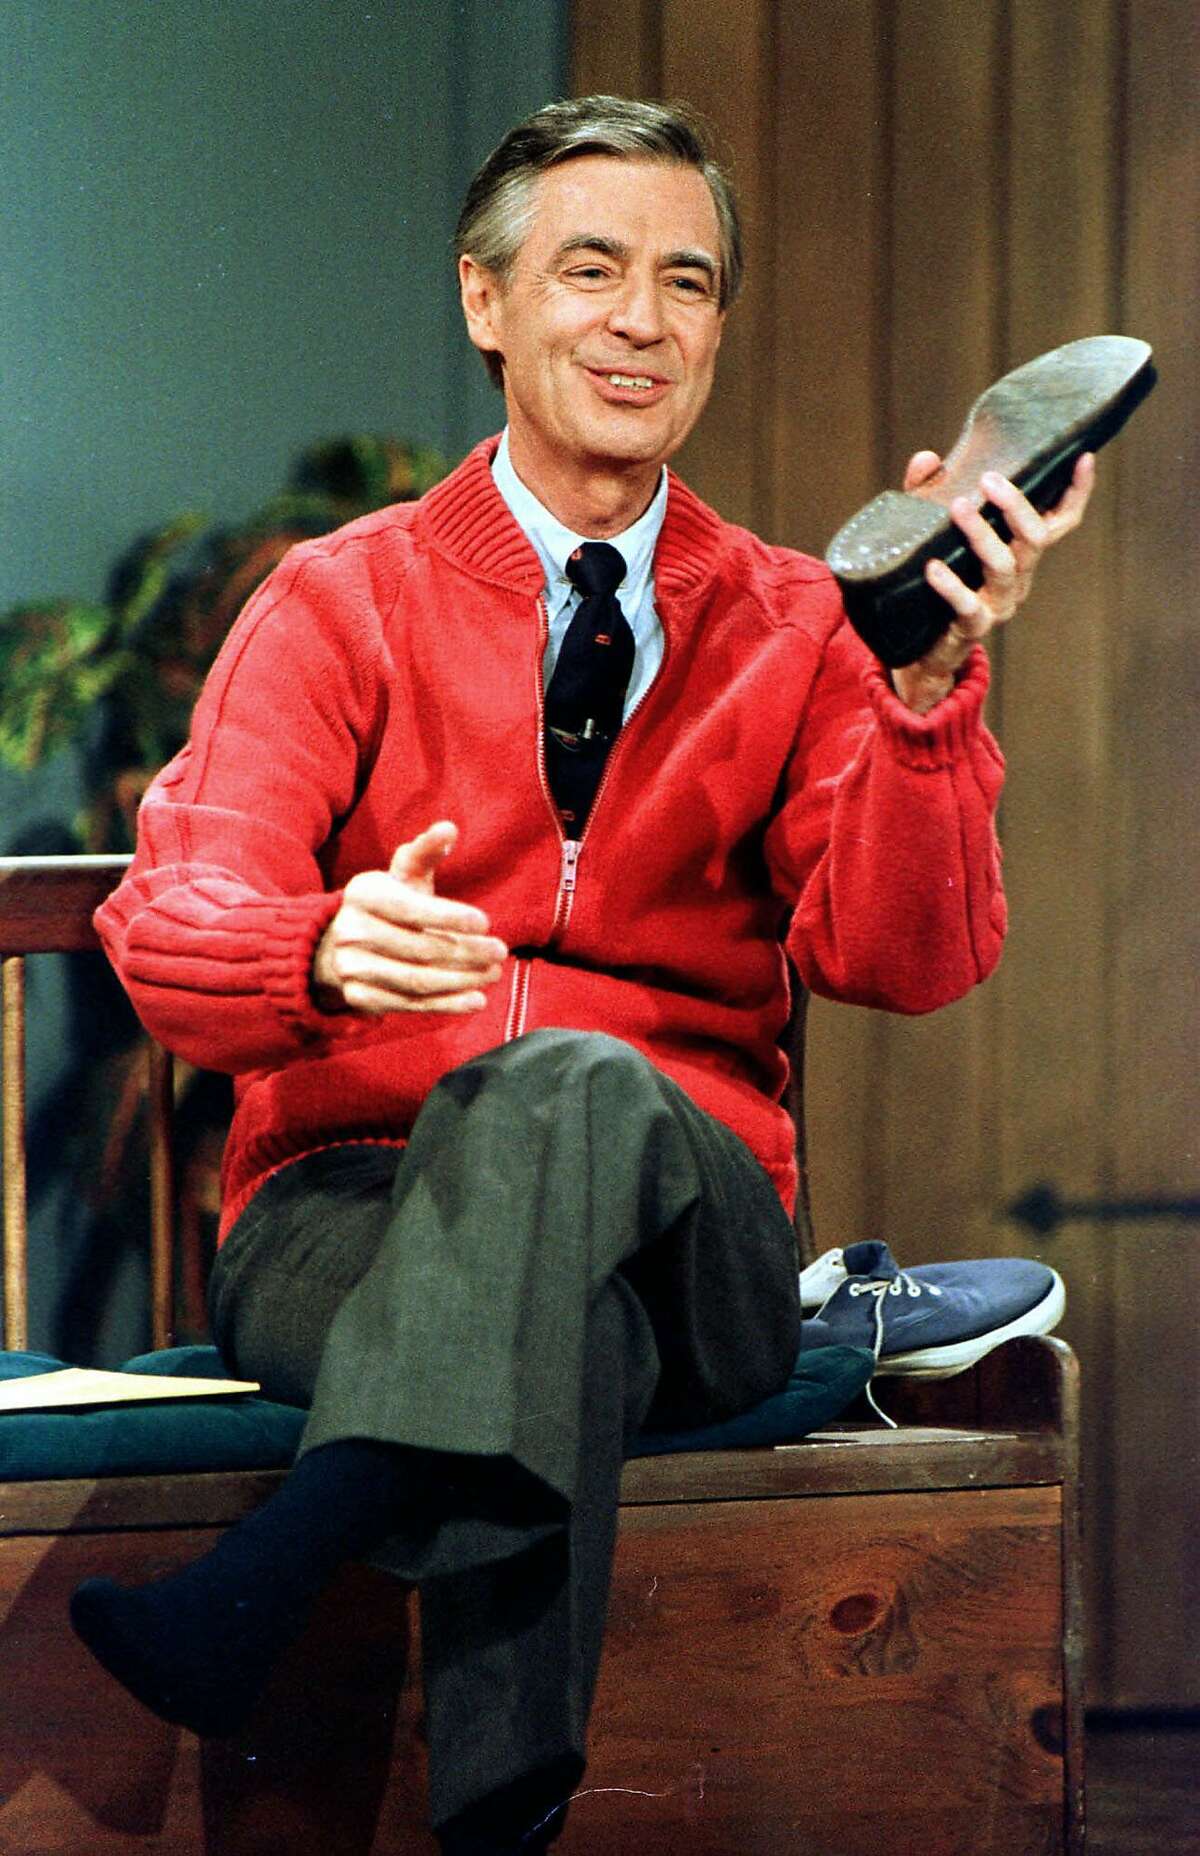 FILE - This June 28, 1989 file photo shows Fred Rogers as he rehearses the opening of his PBS show "Mister Rogers' Neighborhood" during a taping in Pittsburgh. Pennsylvania Gov. Tom Wolf said on Friday, May 10, 2019, that Pennsylvanians will be encouraged to exhibit acts of kindness later this month in honor of the beloved PBS children's show host.